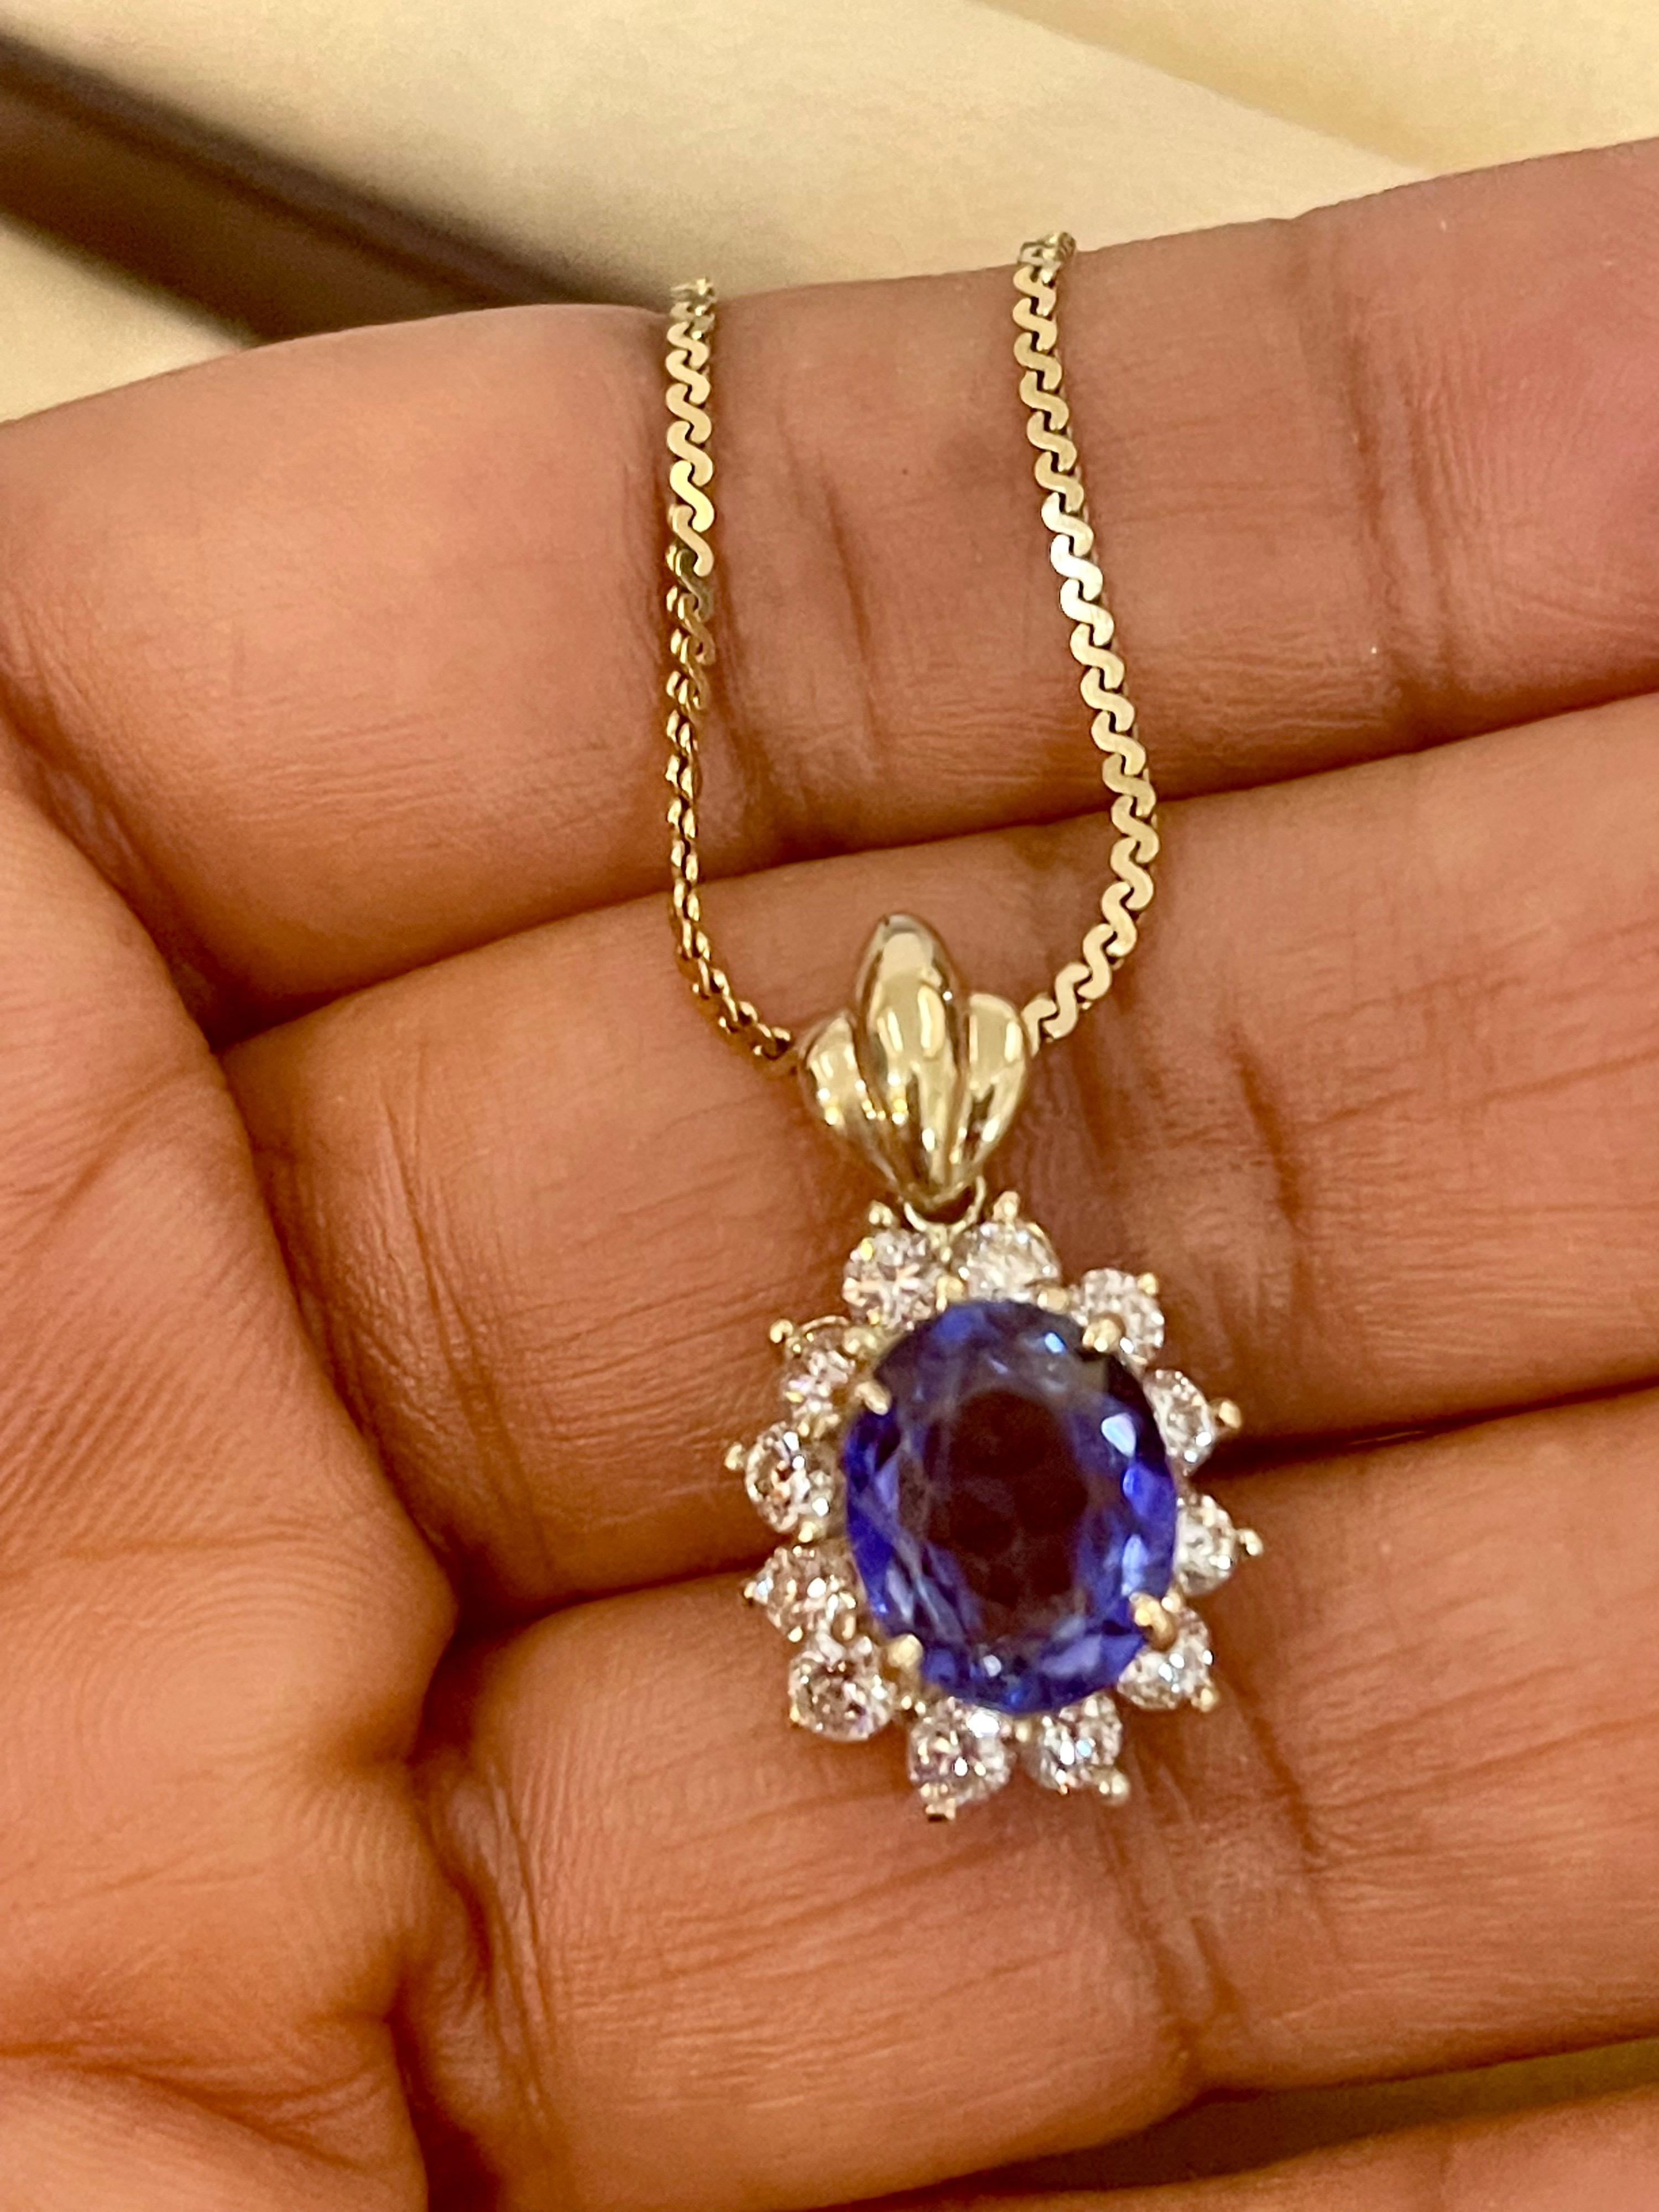 3 Carat Tanzanite and 1 Ct Diamond Pendant or Necklace 14 Karat Yellow Gold In Excellent Condition For Sale In New York, NY